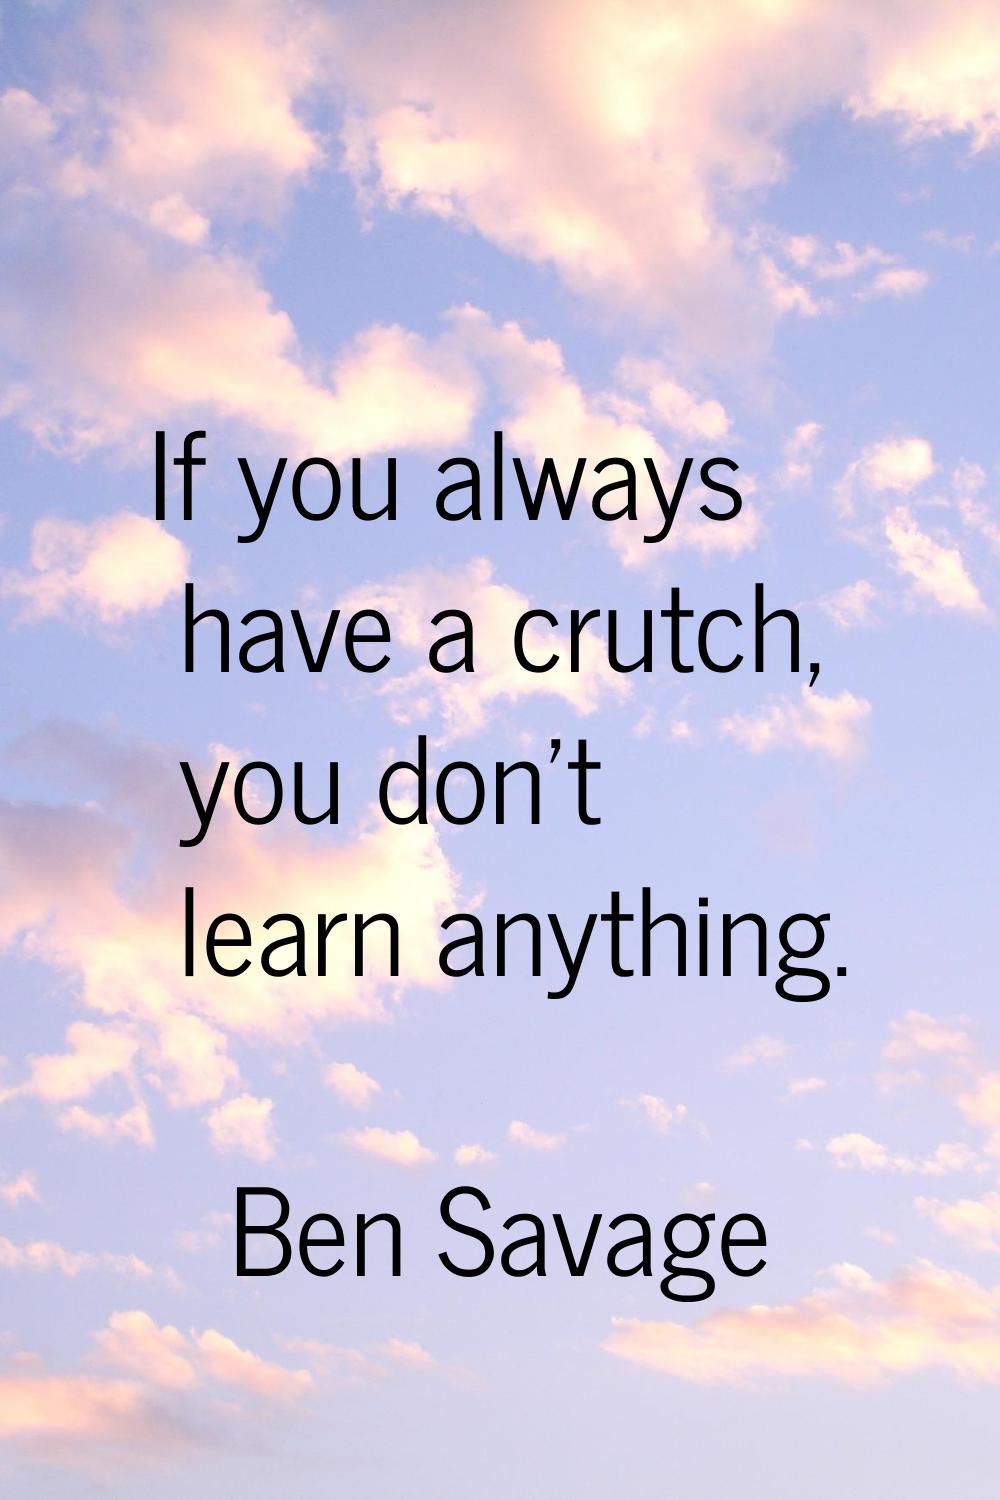 If you always have a crutch, you don't learn anything.